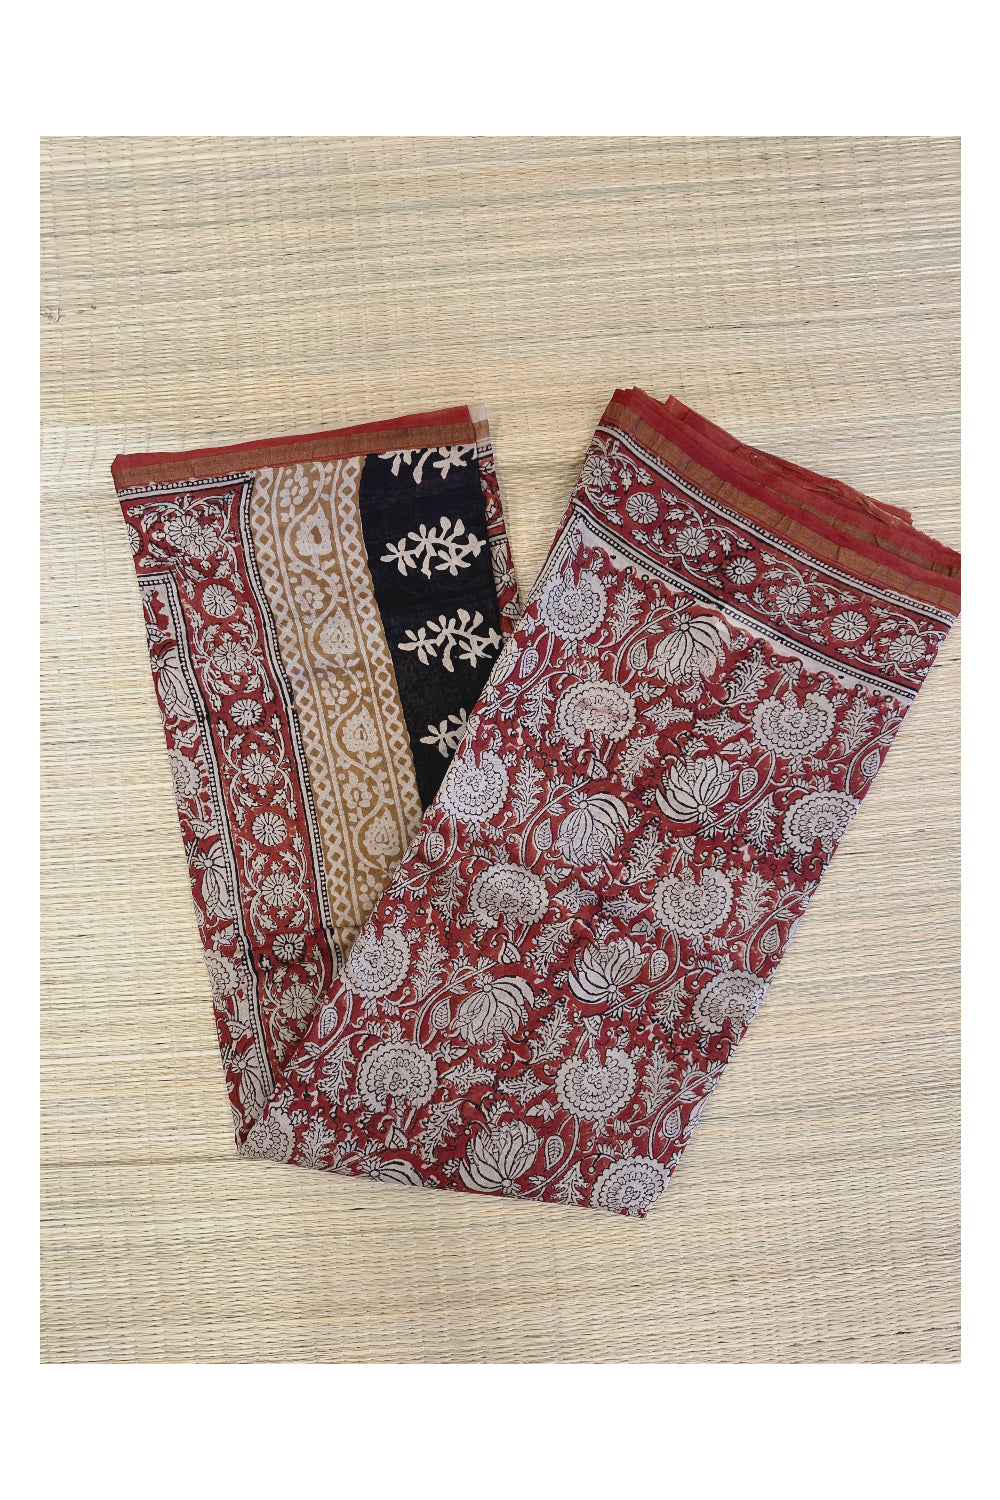 Southloom Chanderi Saree with Jaipur Hand Block Prints Across Body (Printed Blouse)